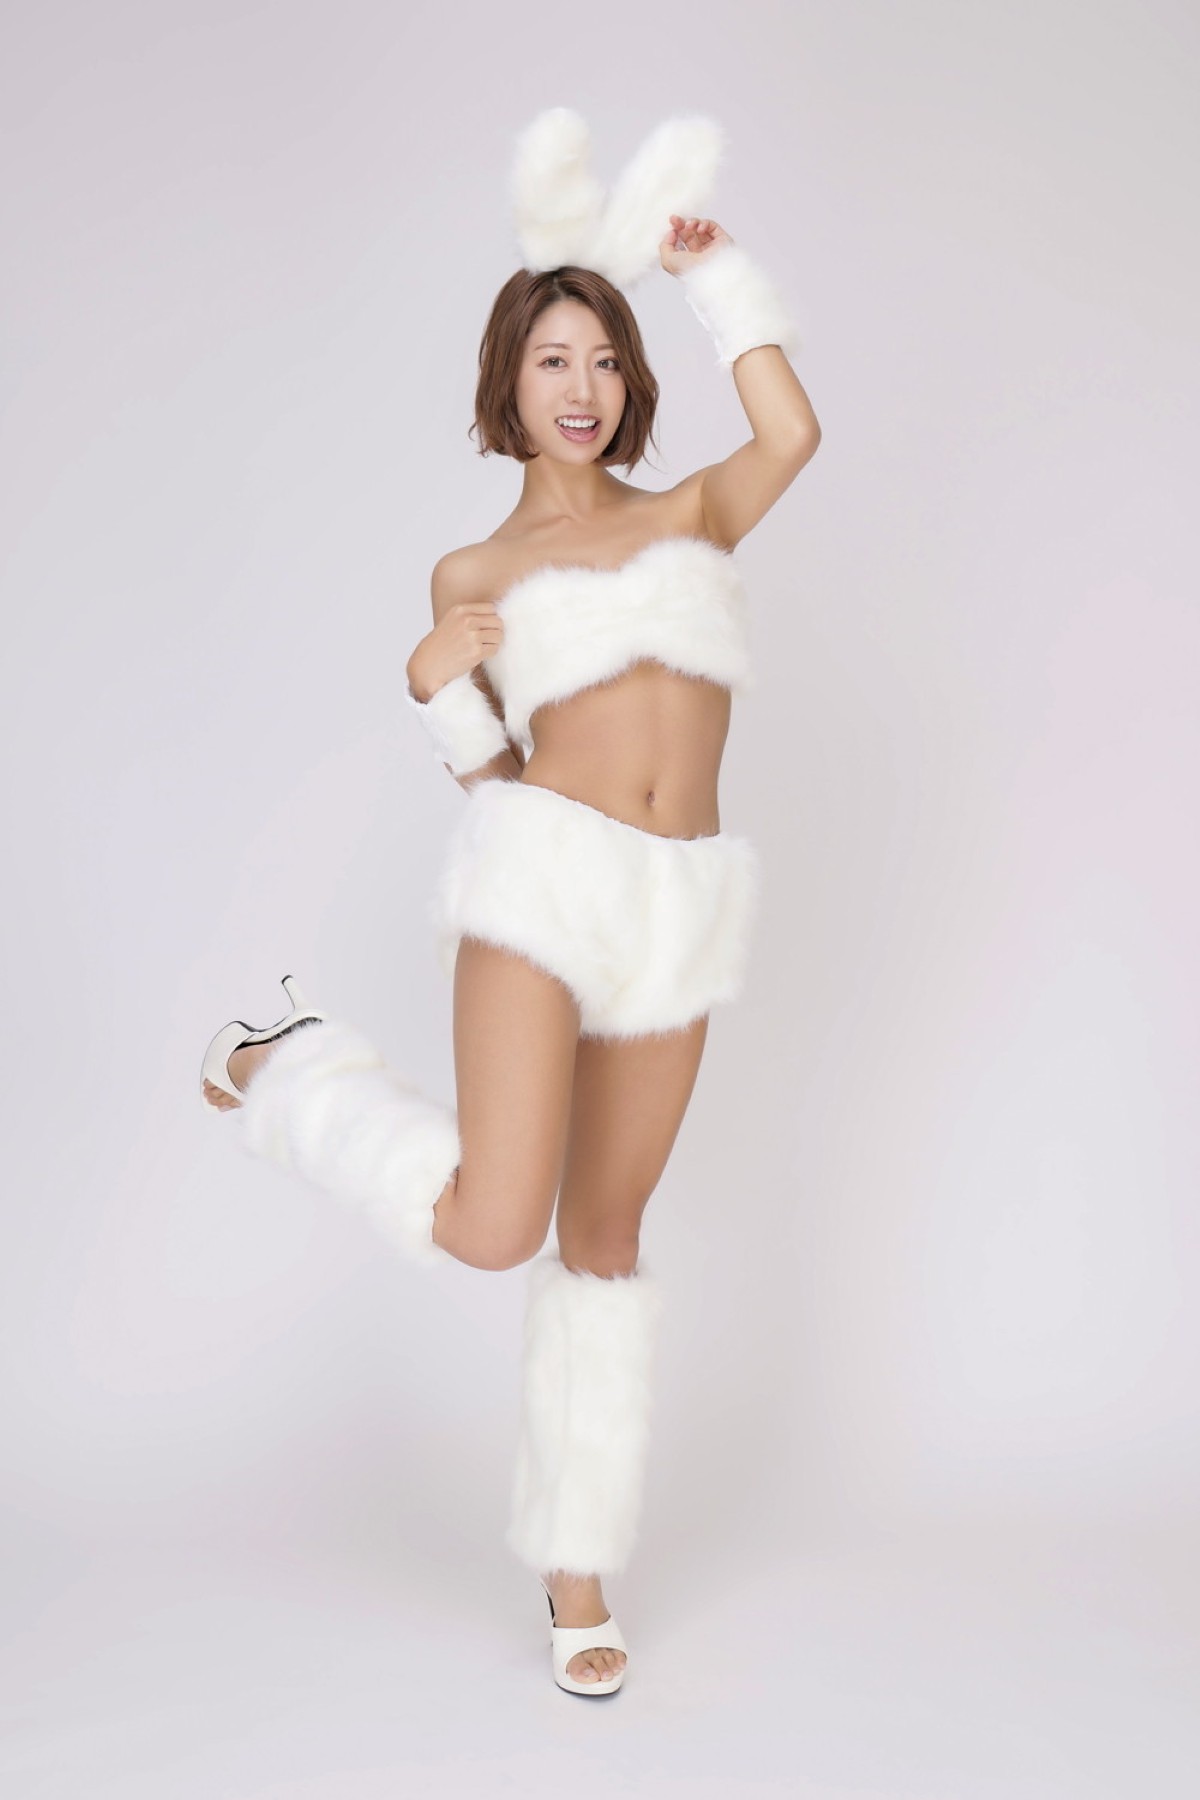 Photobook 2023 01 18 Miru And 5 others New Year Is Eve Super Campaign 2022 2023 Sexy Collection 0021 9144377935.jpg